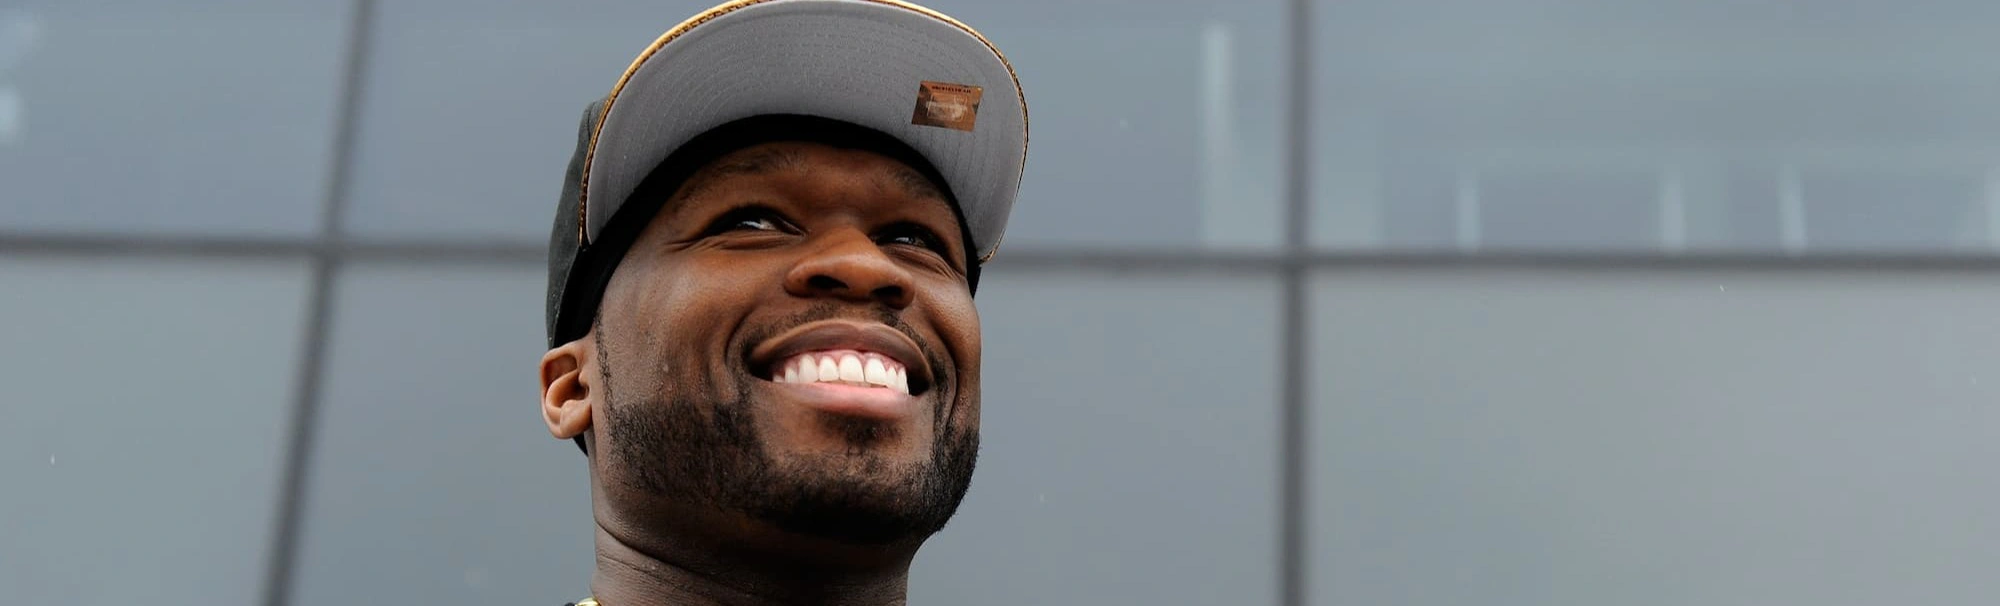 Don't miss 50 Cent's unforgettable concert in Abu Dhabi this winter!